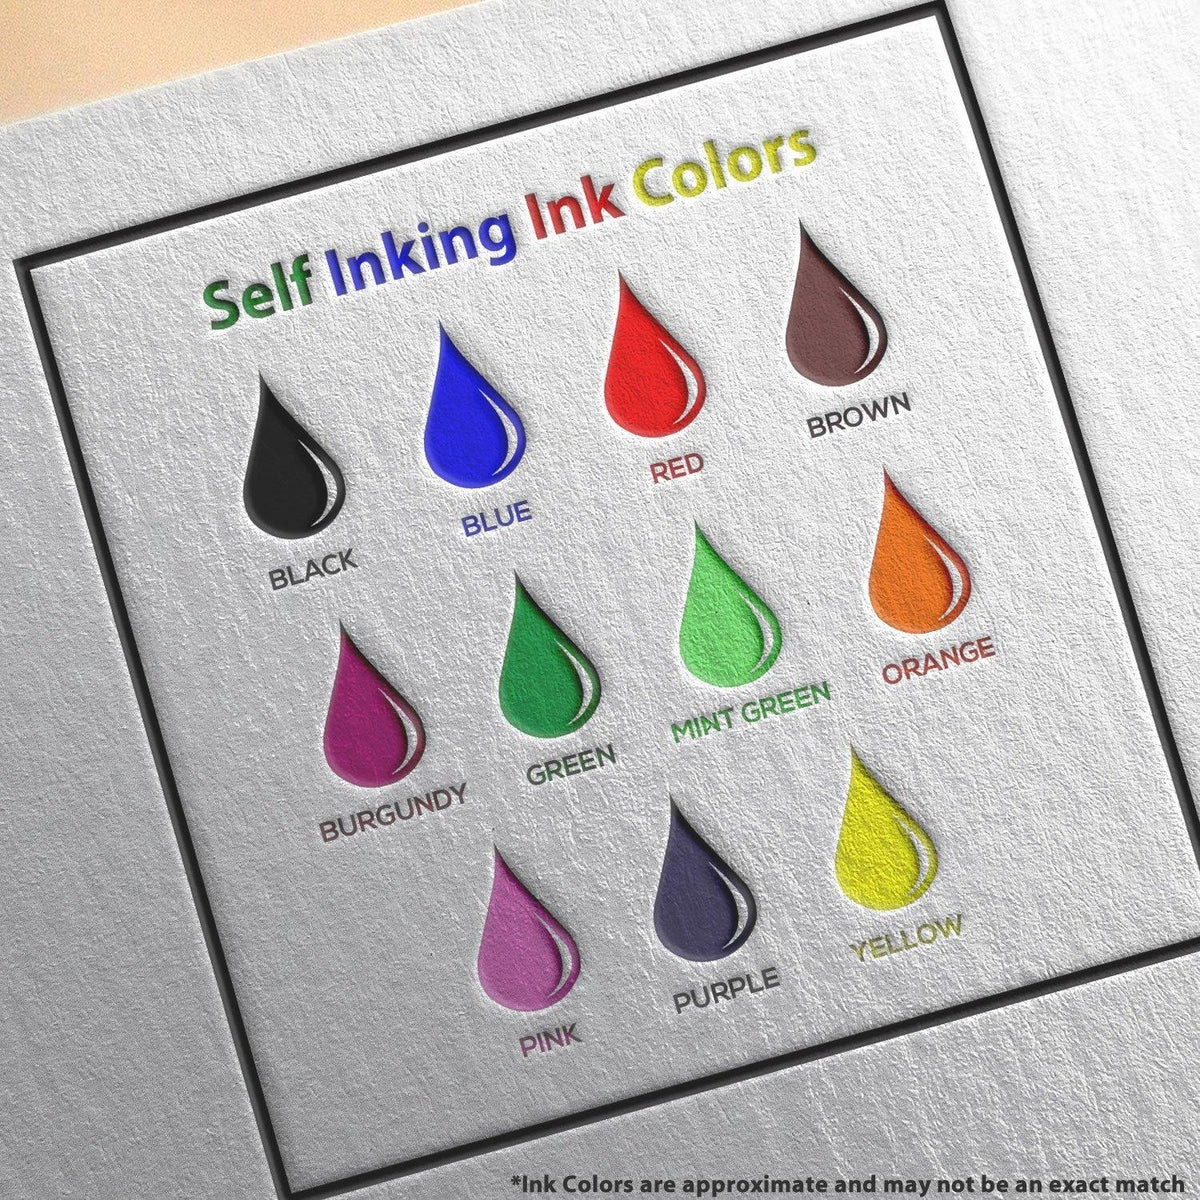 Self Inking Attorneys Copy Stamp - Engineer Seal Stamps - Brand_Trodat, Impression Size_Small, Stamp Type_Self-Inking Stamp, Type of Use_Legal